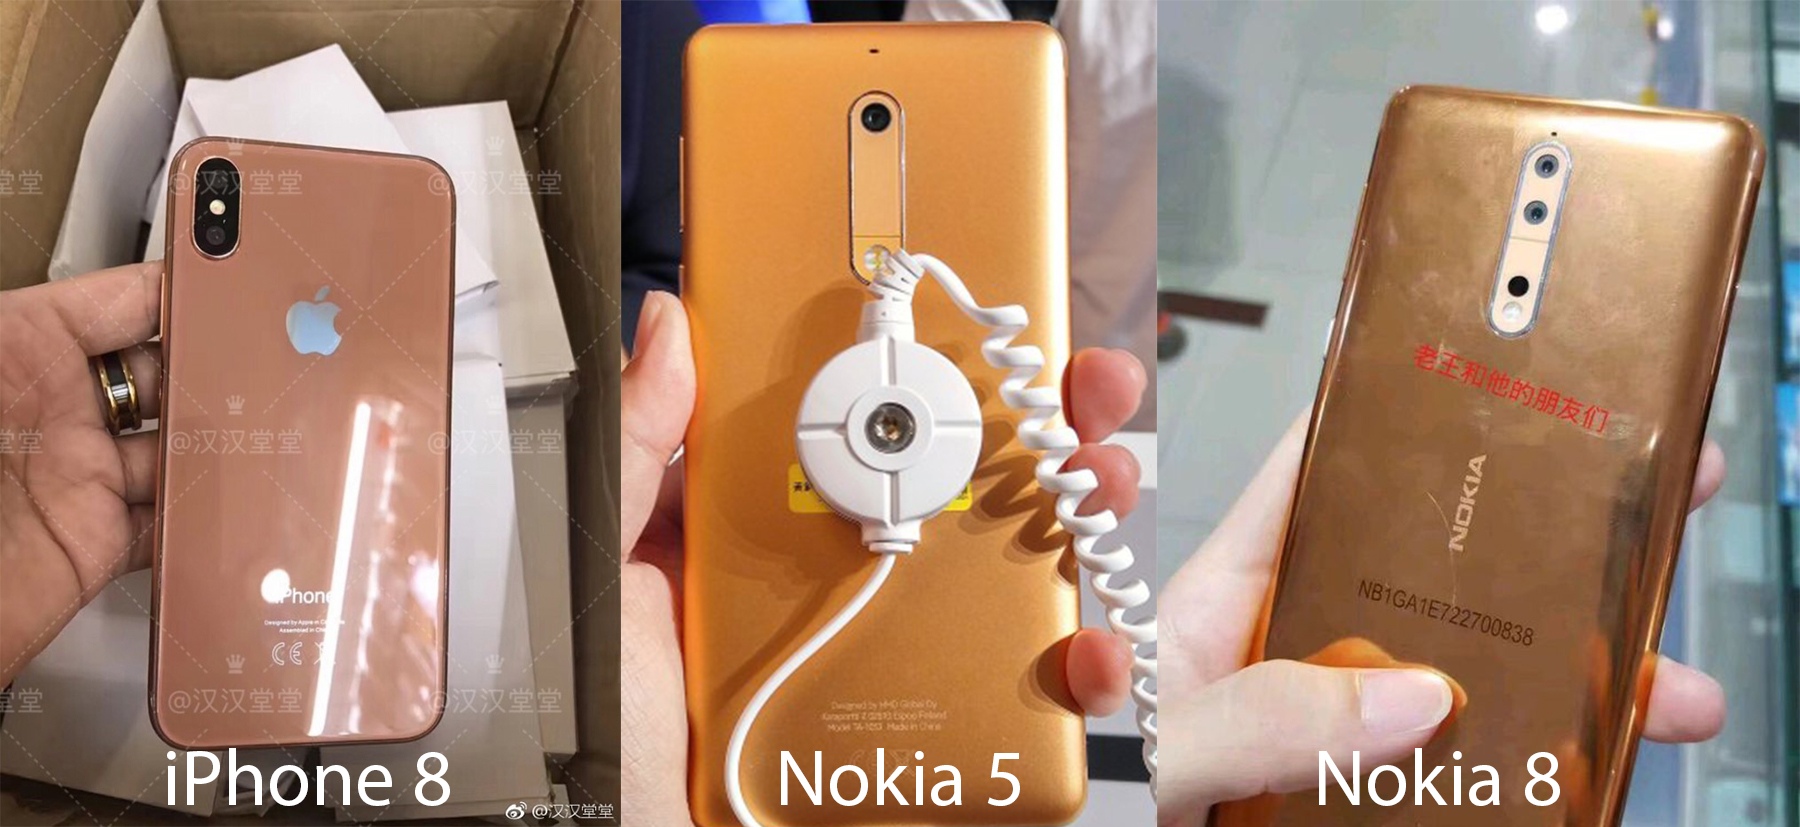 Nokia 8's goldcopper color will be the new black, confirms the latest